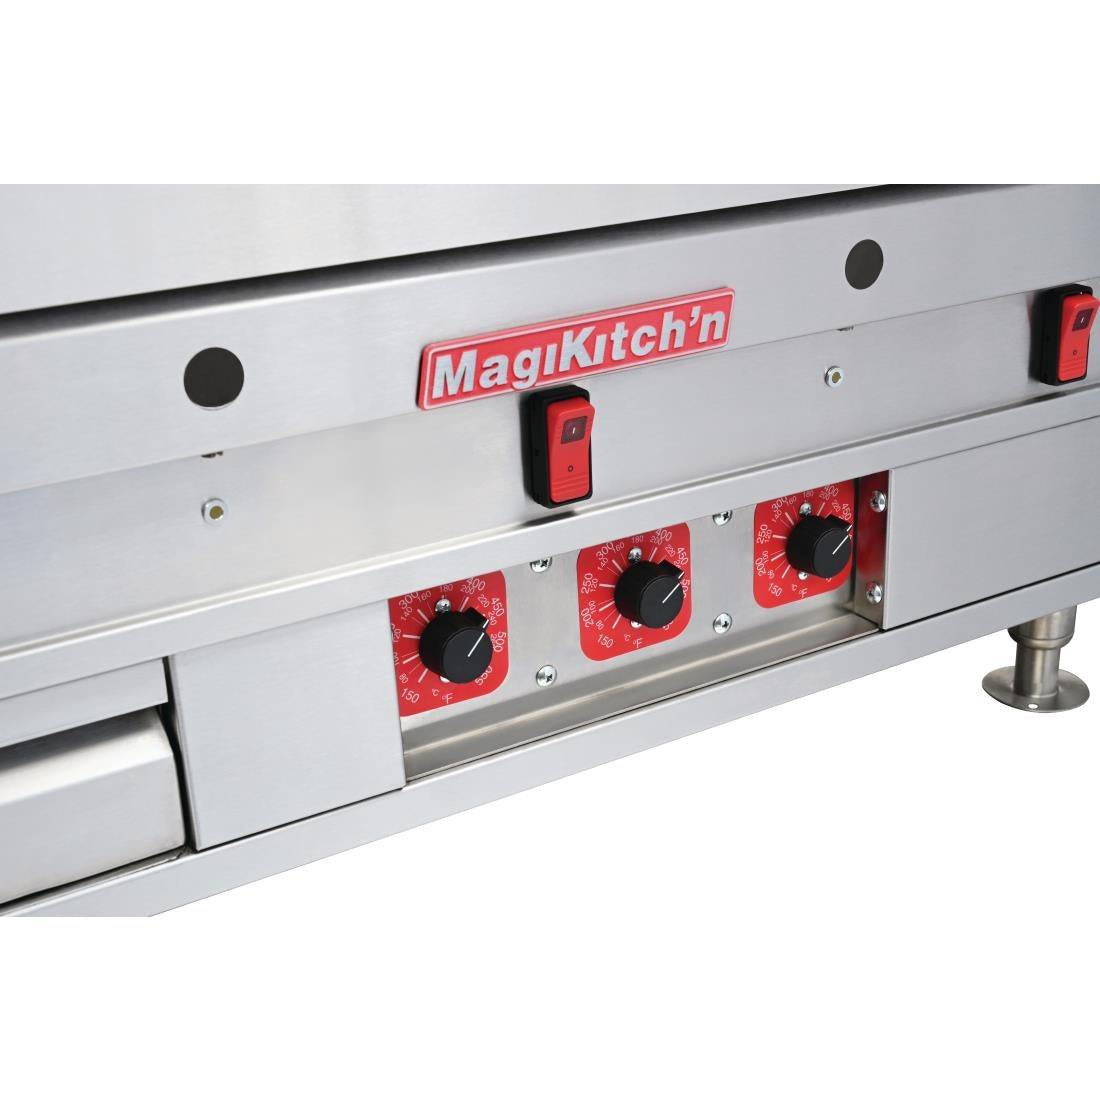 FP882 MagiKitch'n Heavy Duty Chrome Griddle MKG24 JD Catering Equipment Solutions Ltd